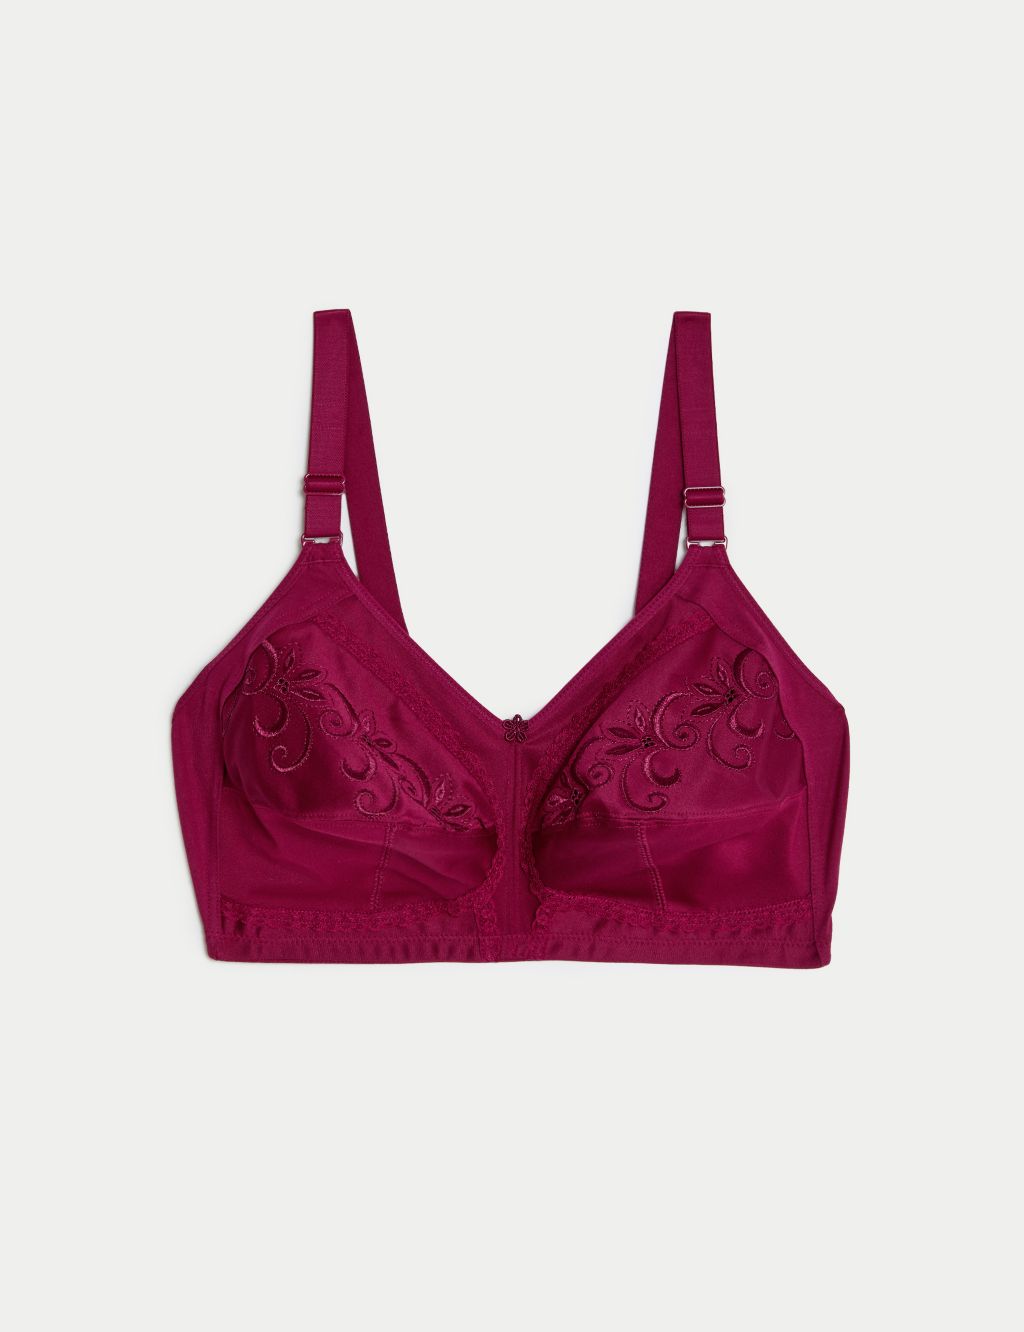 Total Support Embroidered Full Cup Bra DD-K image 2